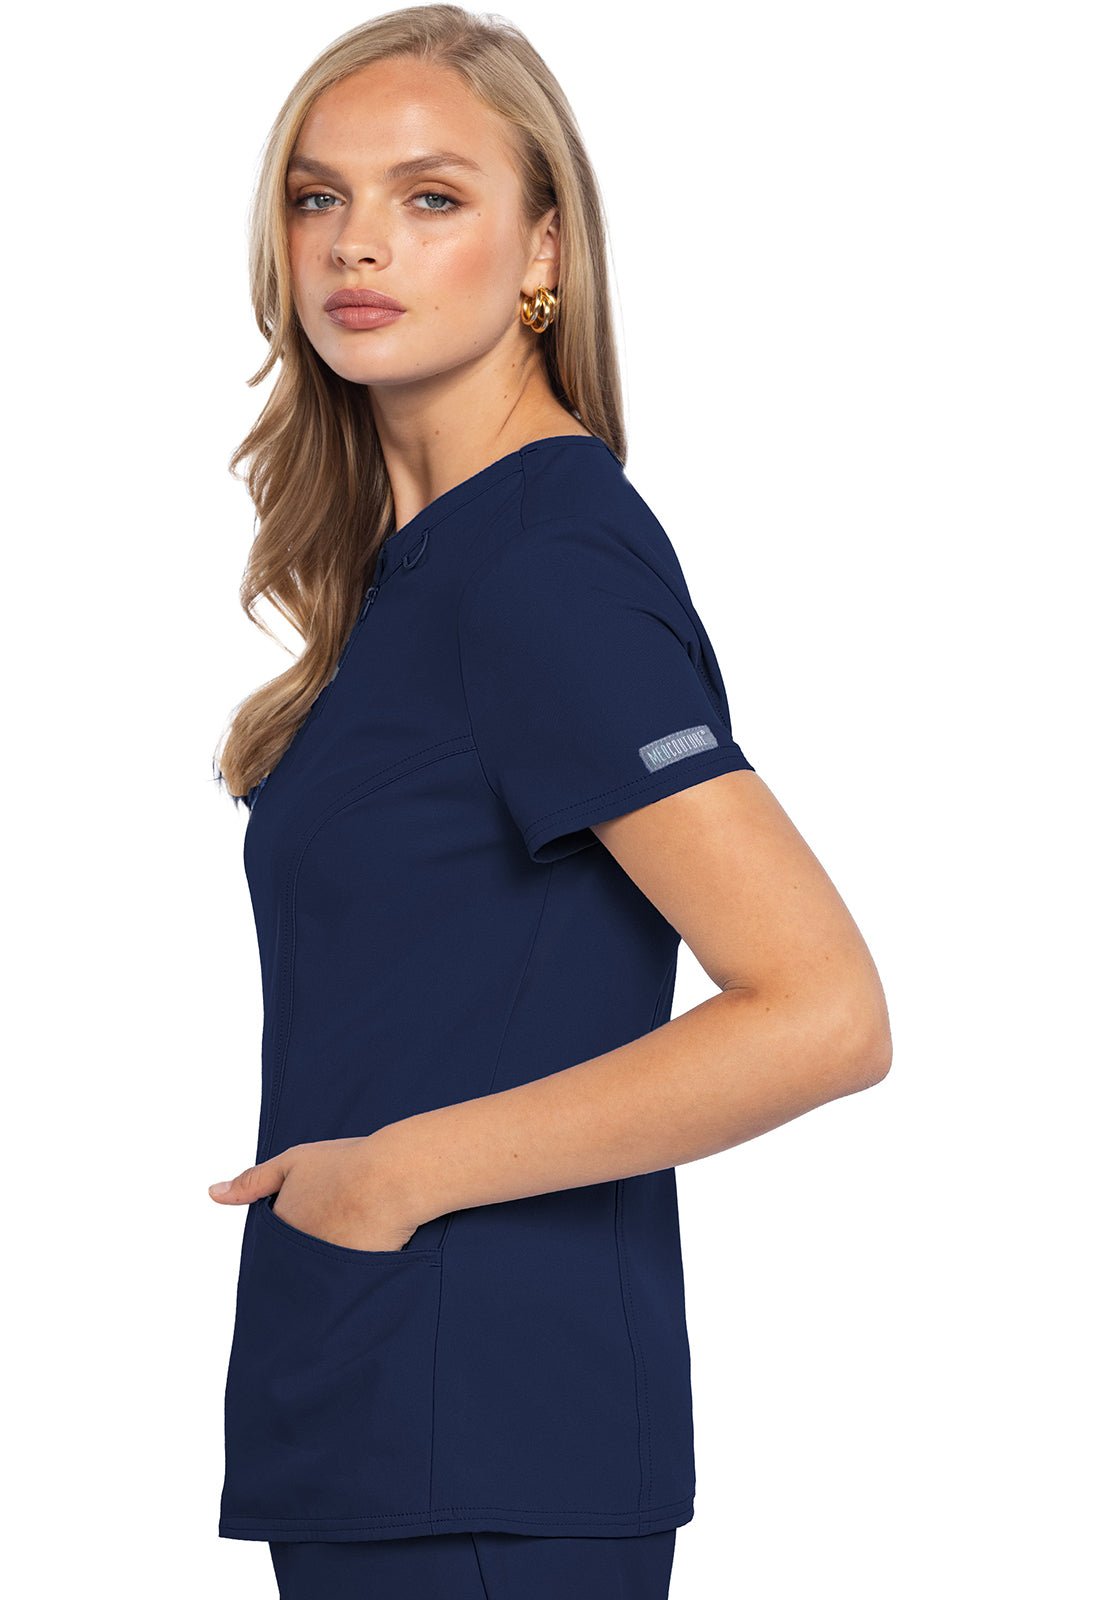 Med Couture Insight Zip Front Henley Scrub Top MC609 - Scrubs Select